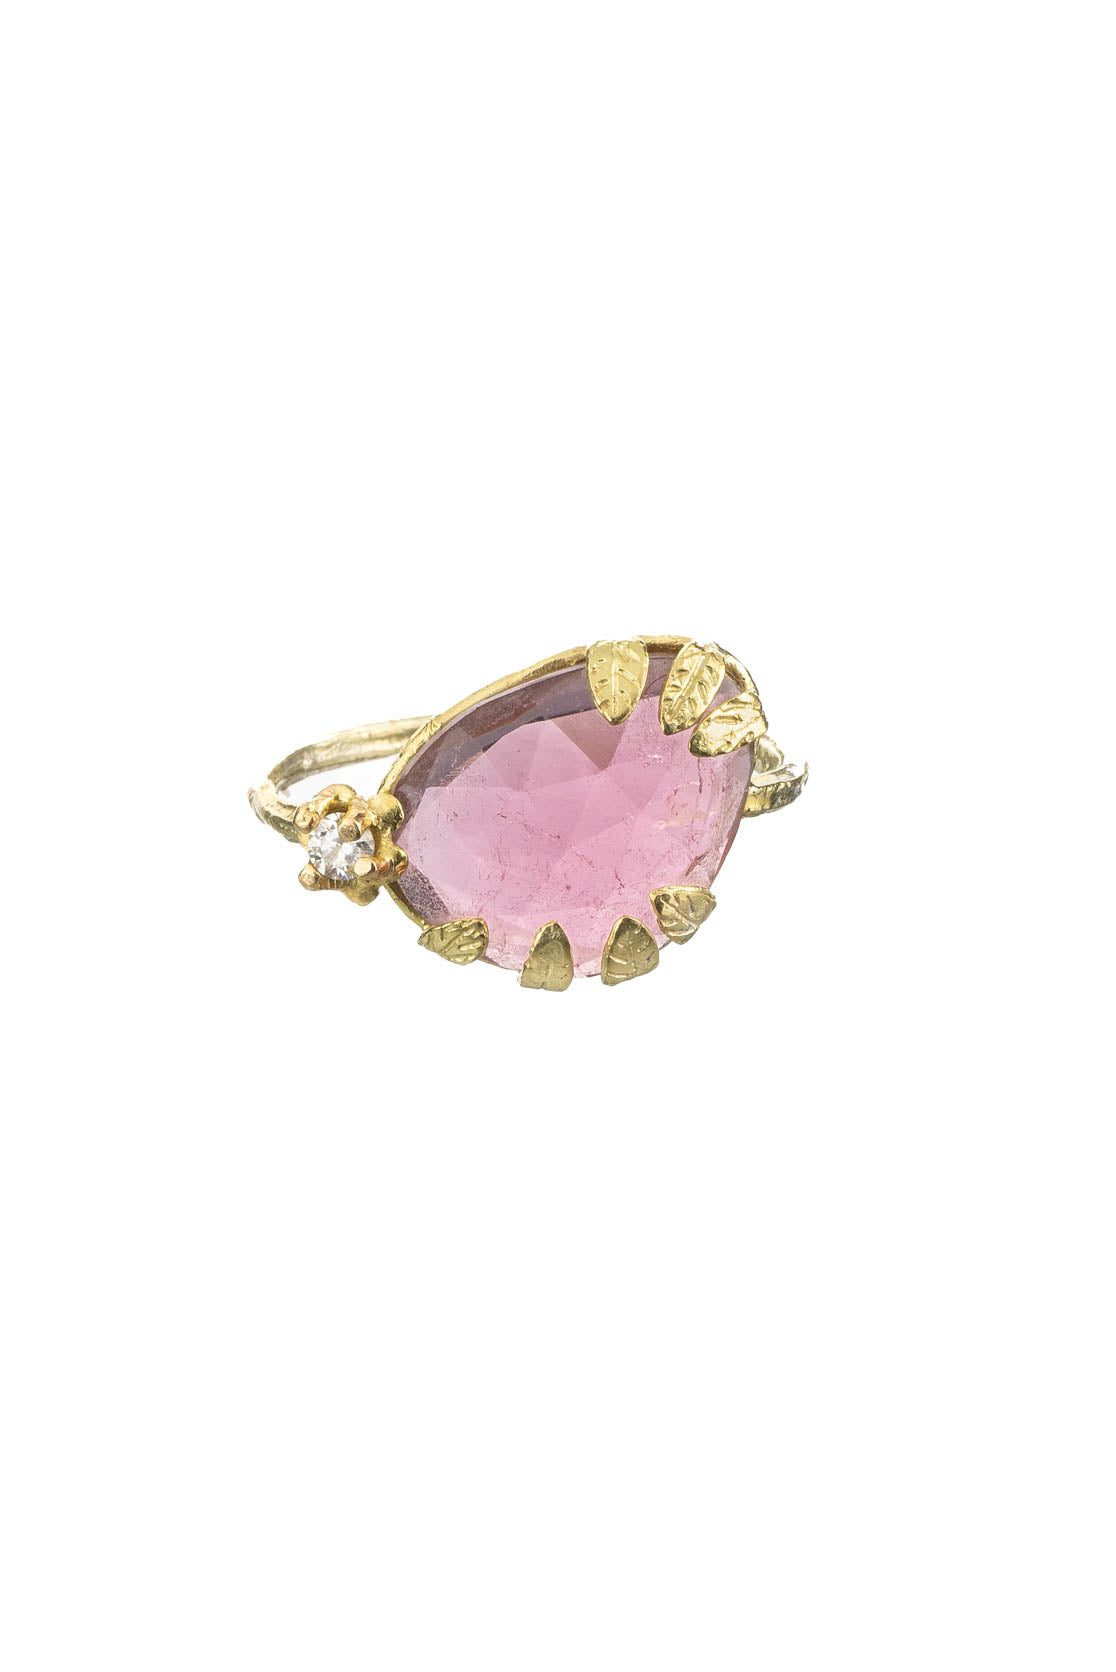 One-of-a-kind 18ct Gold, Pink Tourmaline And Diamond Ring